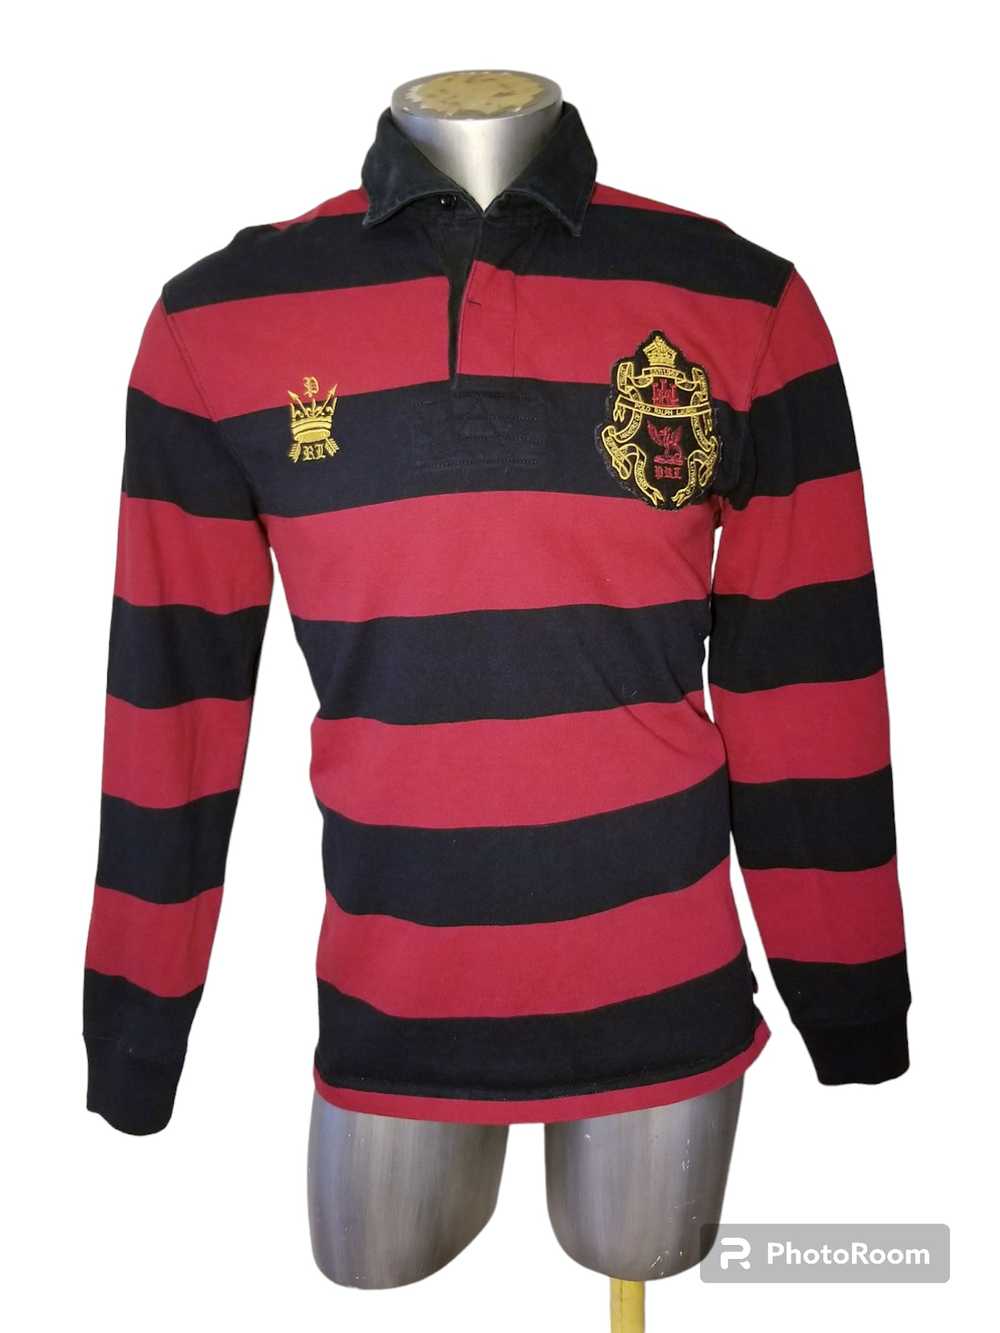 Polo Ralph Lauren rugby #5 patch vintage - image 1